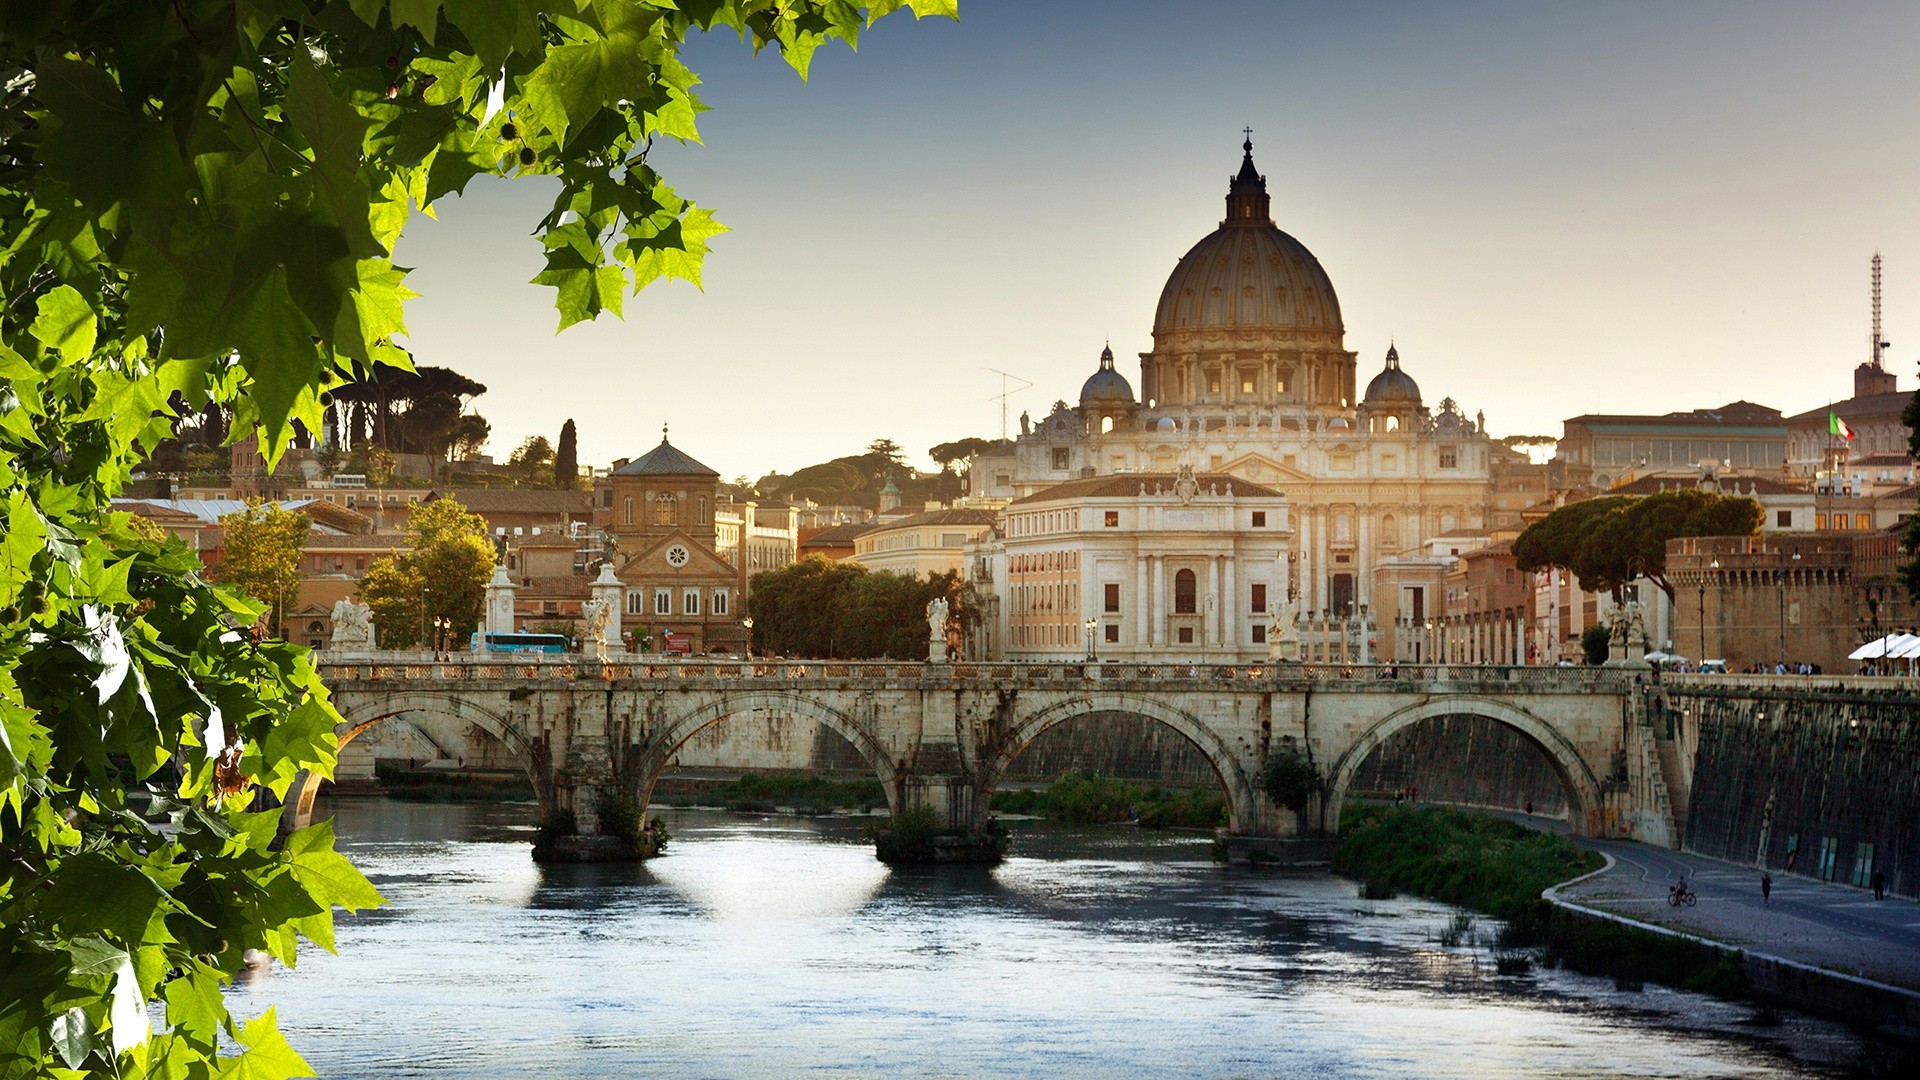 General 1920x1080 cityscape architecture Rome Italy old building trees cathedral bridge river wall sunlight